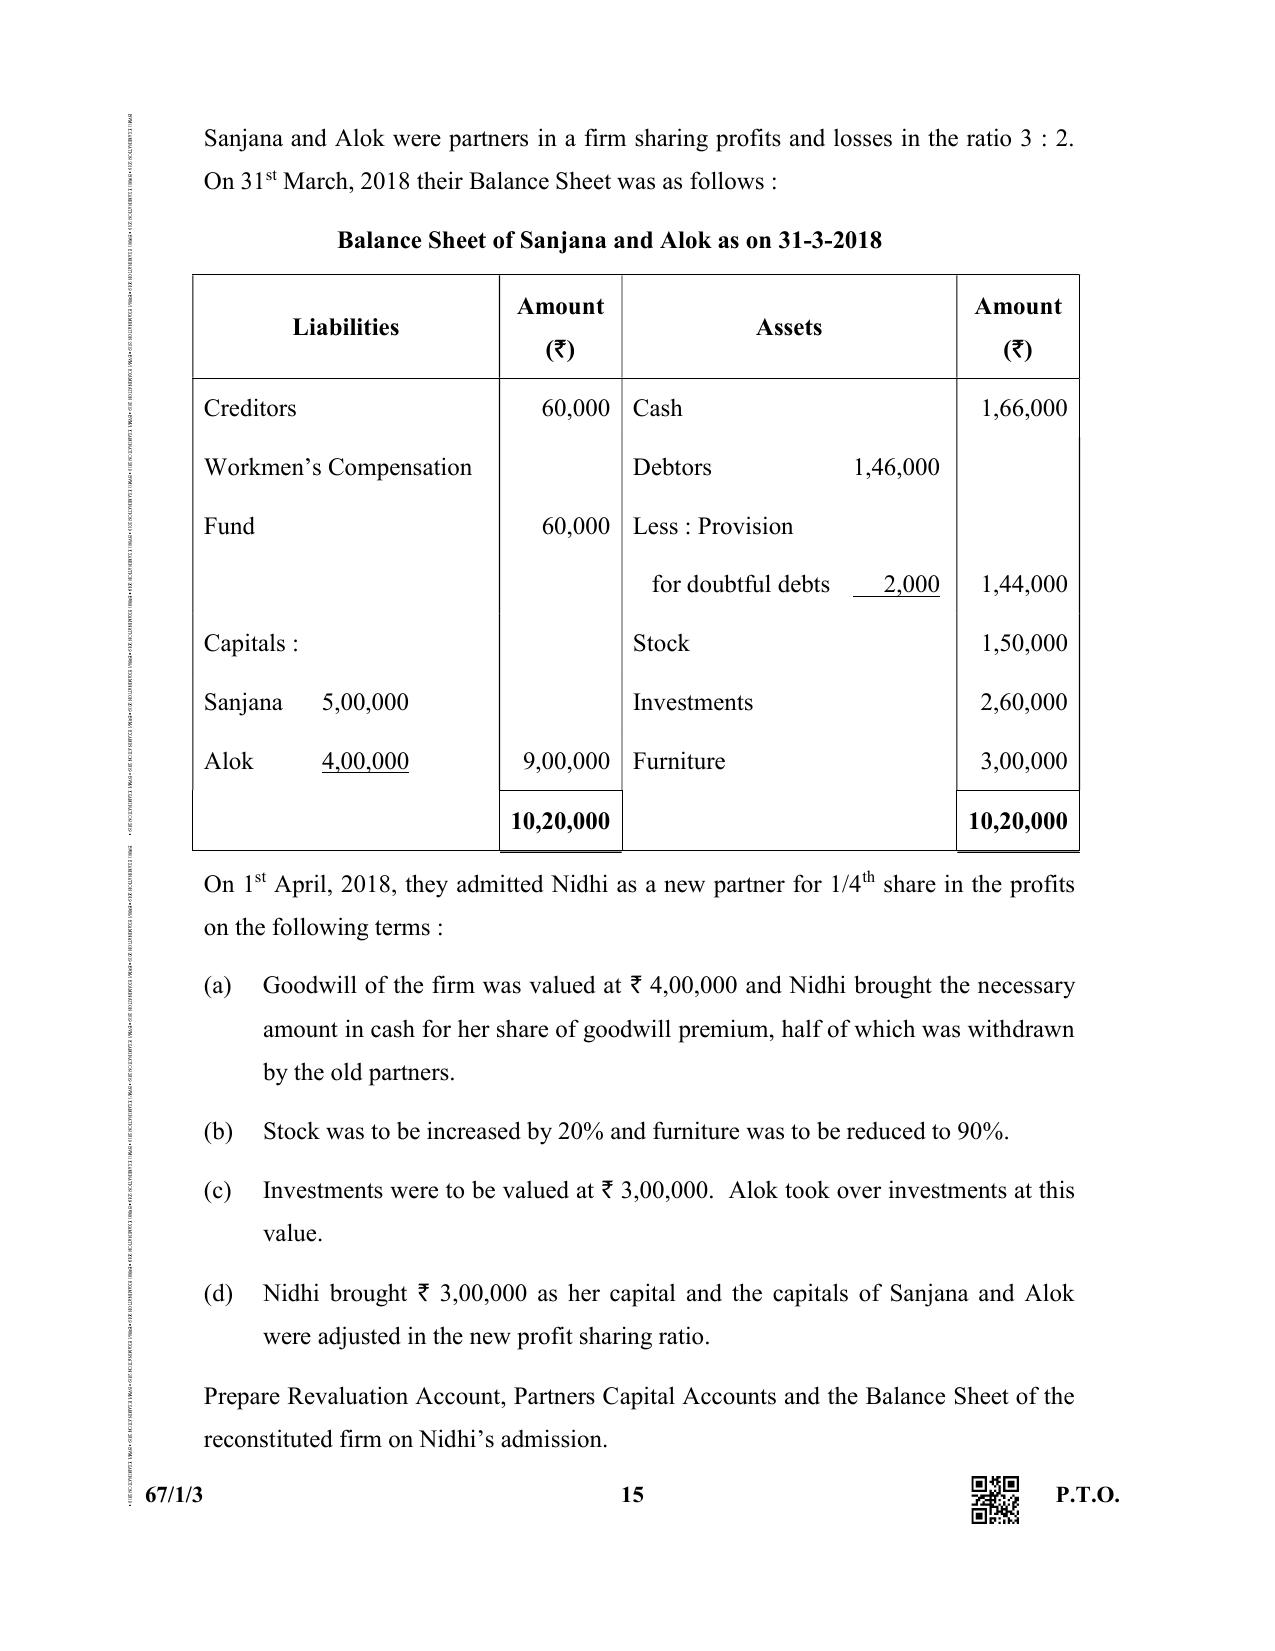 CBSE Class 12 67-1-3  (Accountancy) 2019 Question Paper - Page 15